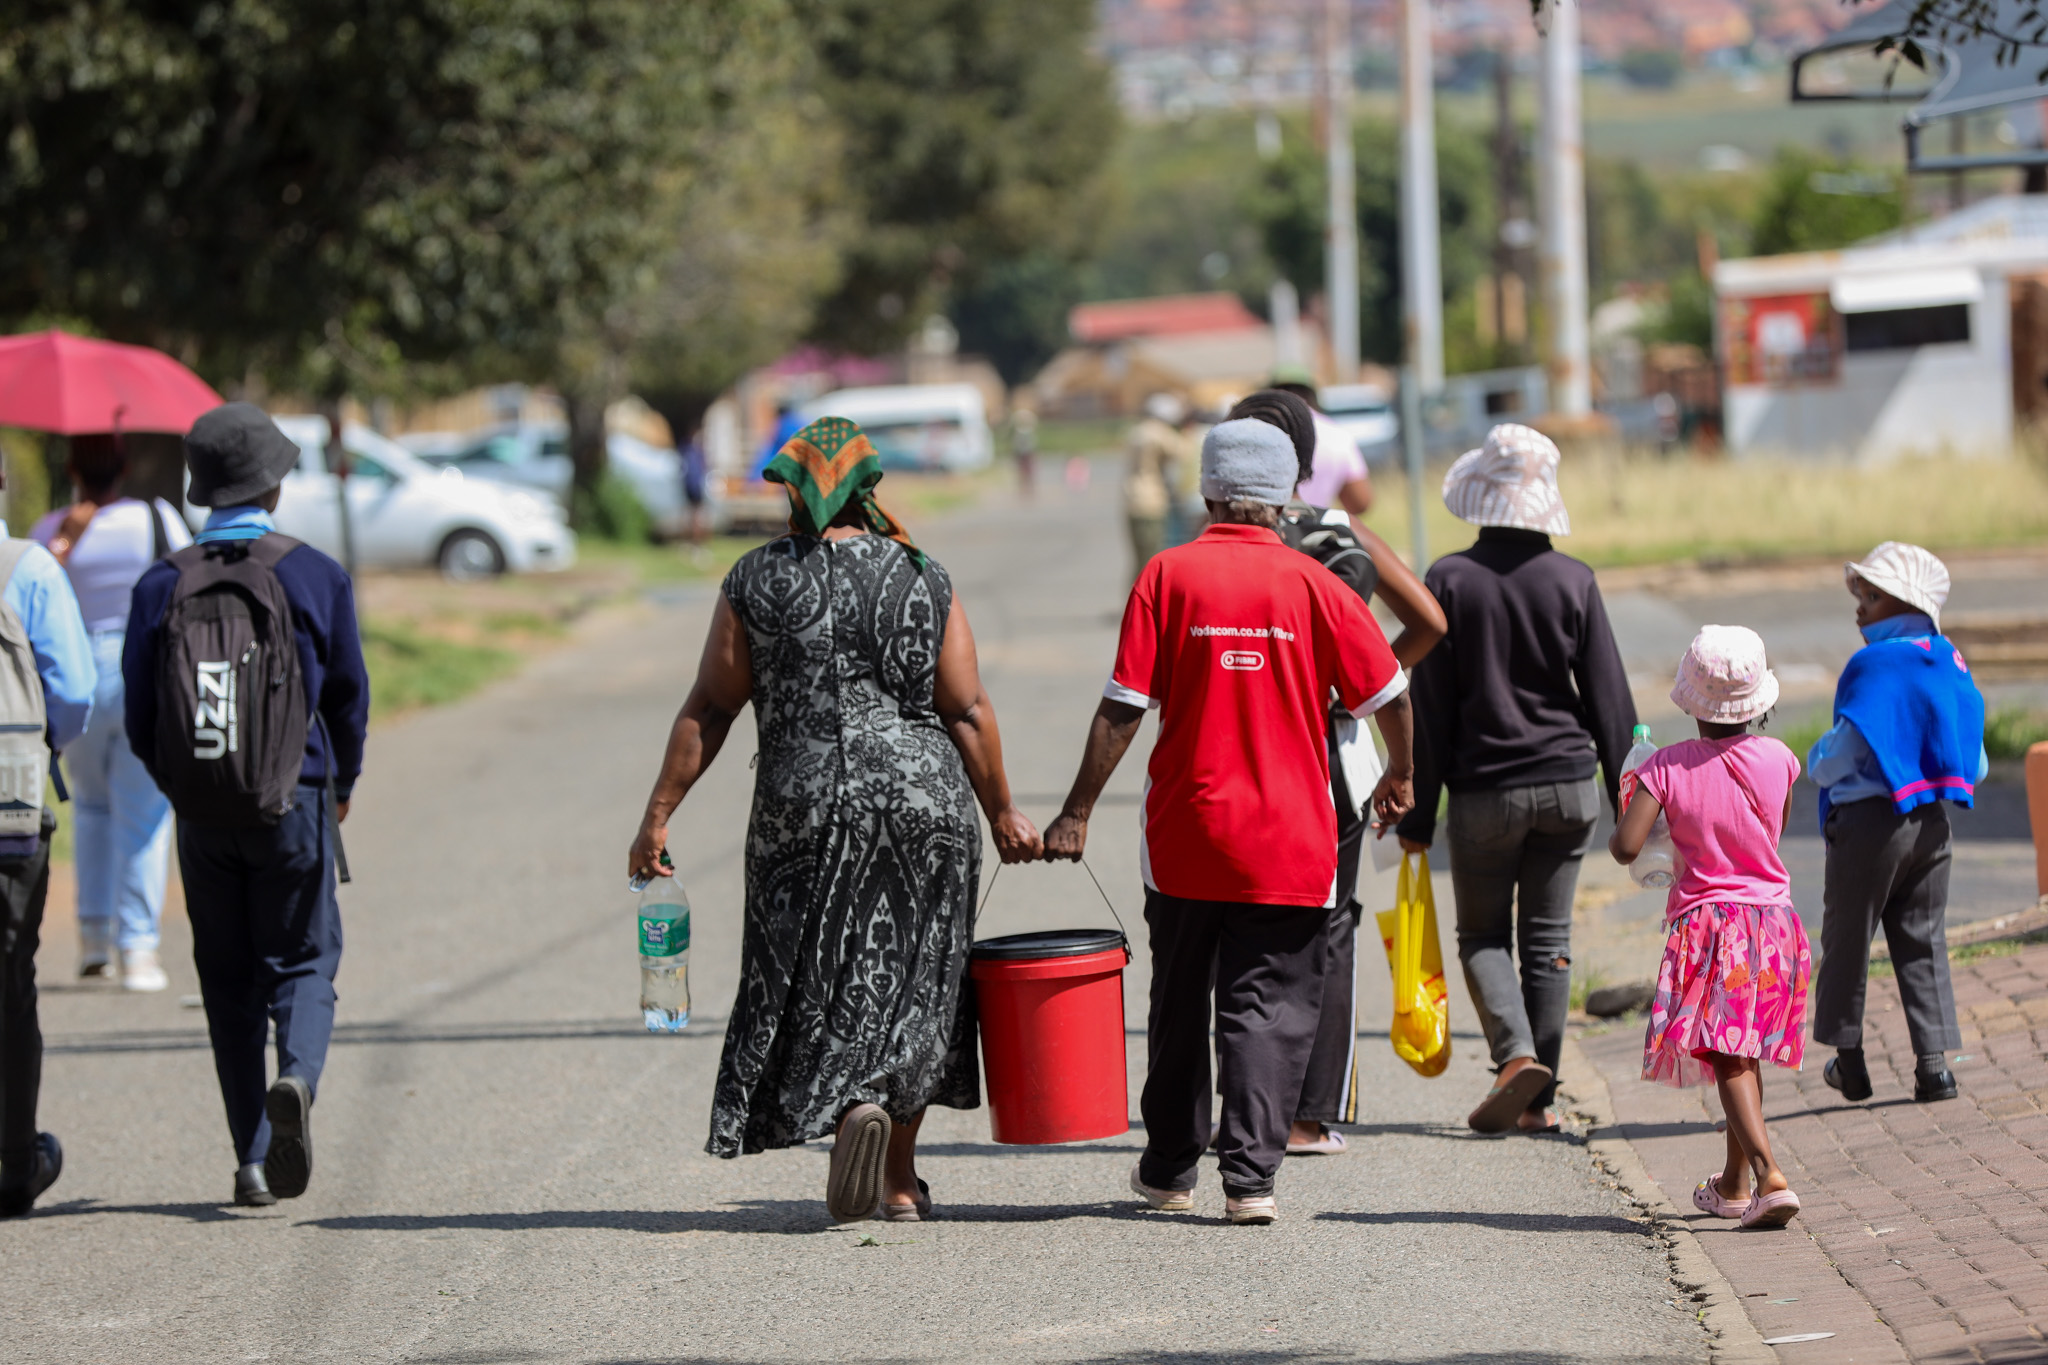 Residents of Dube and Meadowlands fetching water in on March 15, 2024 in Soweto, South Africa. It is reported that the water crisis is due to faults and power outages at several pumping stations, and has affected several areas in the south of Joburg and in others such as Bryanston and Kensington. (Photo by Gallo Images/Fani Mahuntsi)